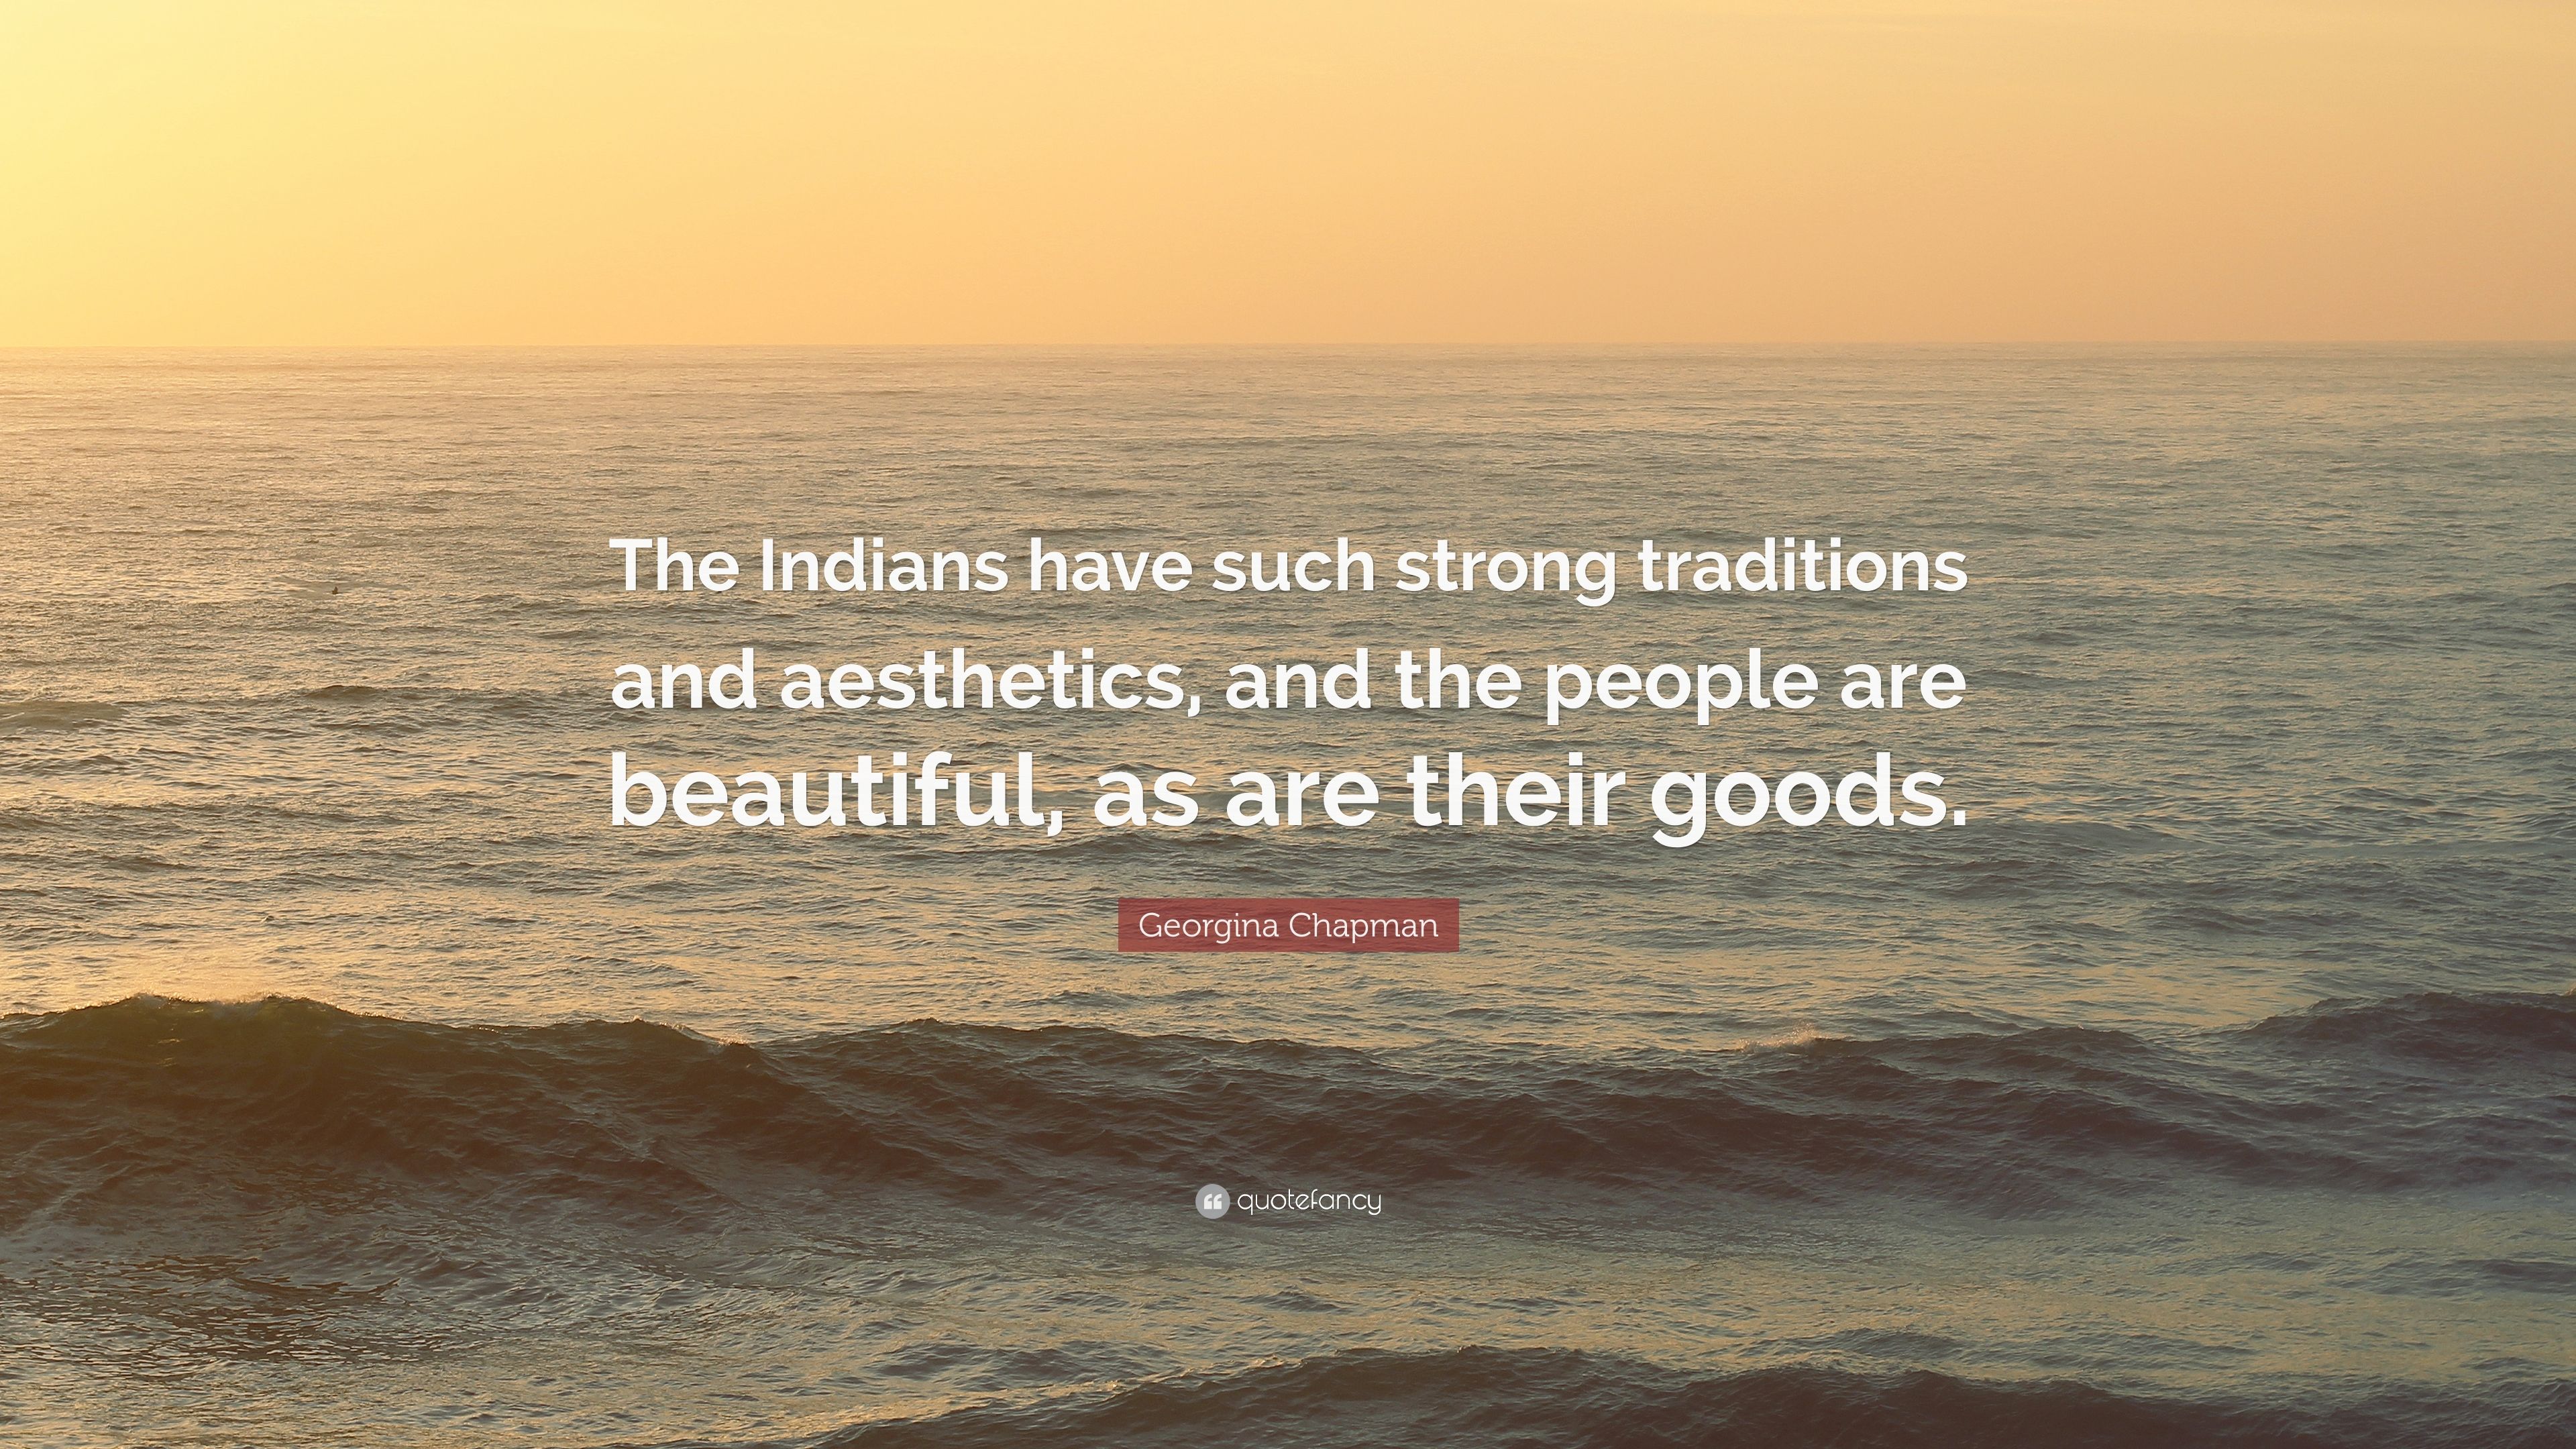 Georgina Chapman Quote: “The Indians have such strong